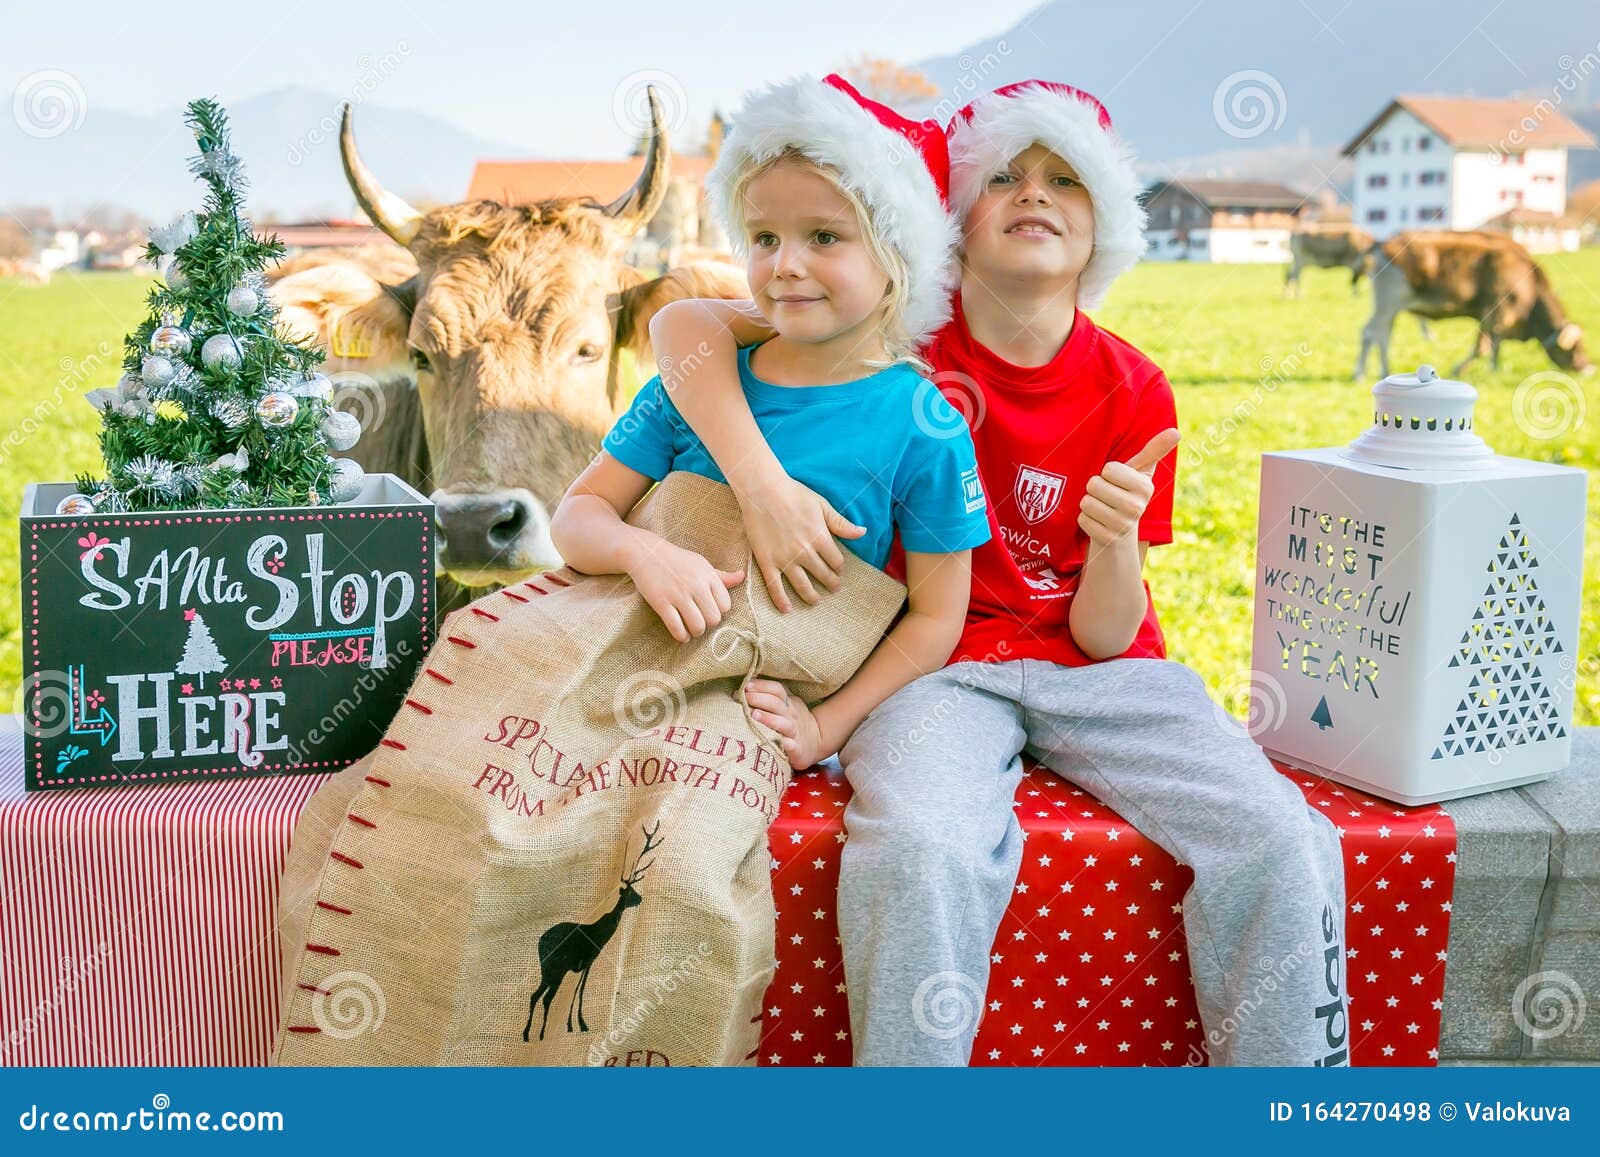 Funny Christmas Pose by Two Children and Cow Stock Photo - Image of posing,  santa: 164270498